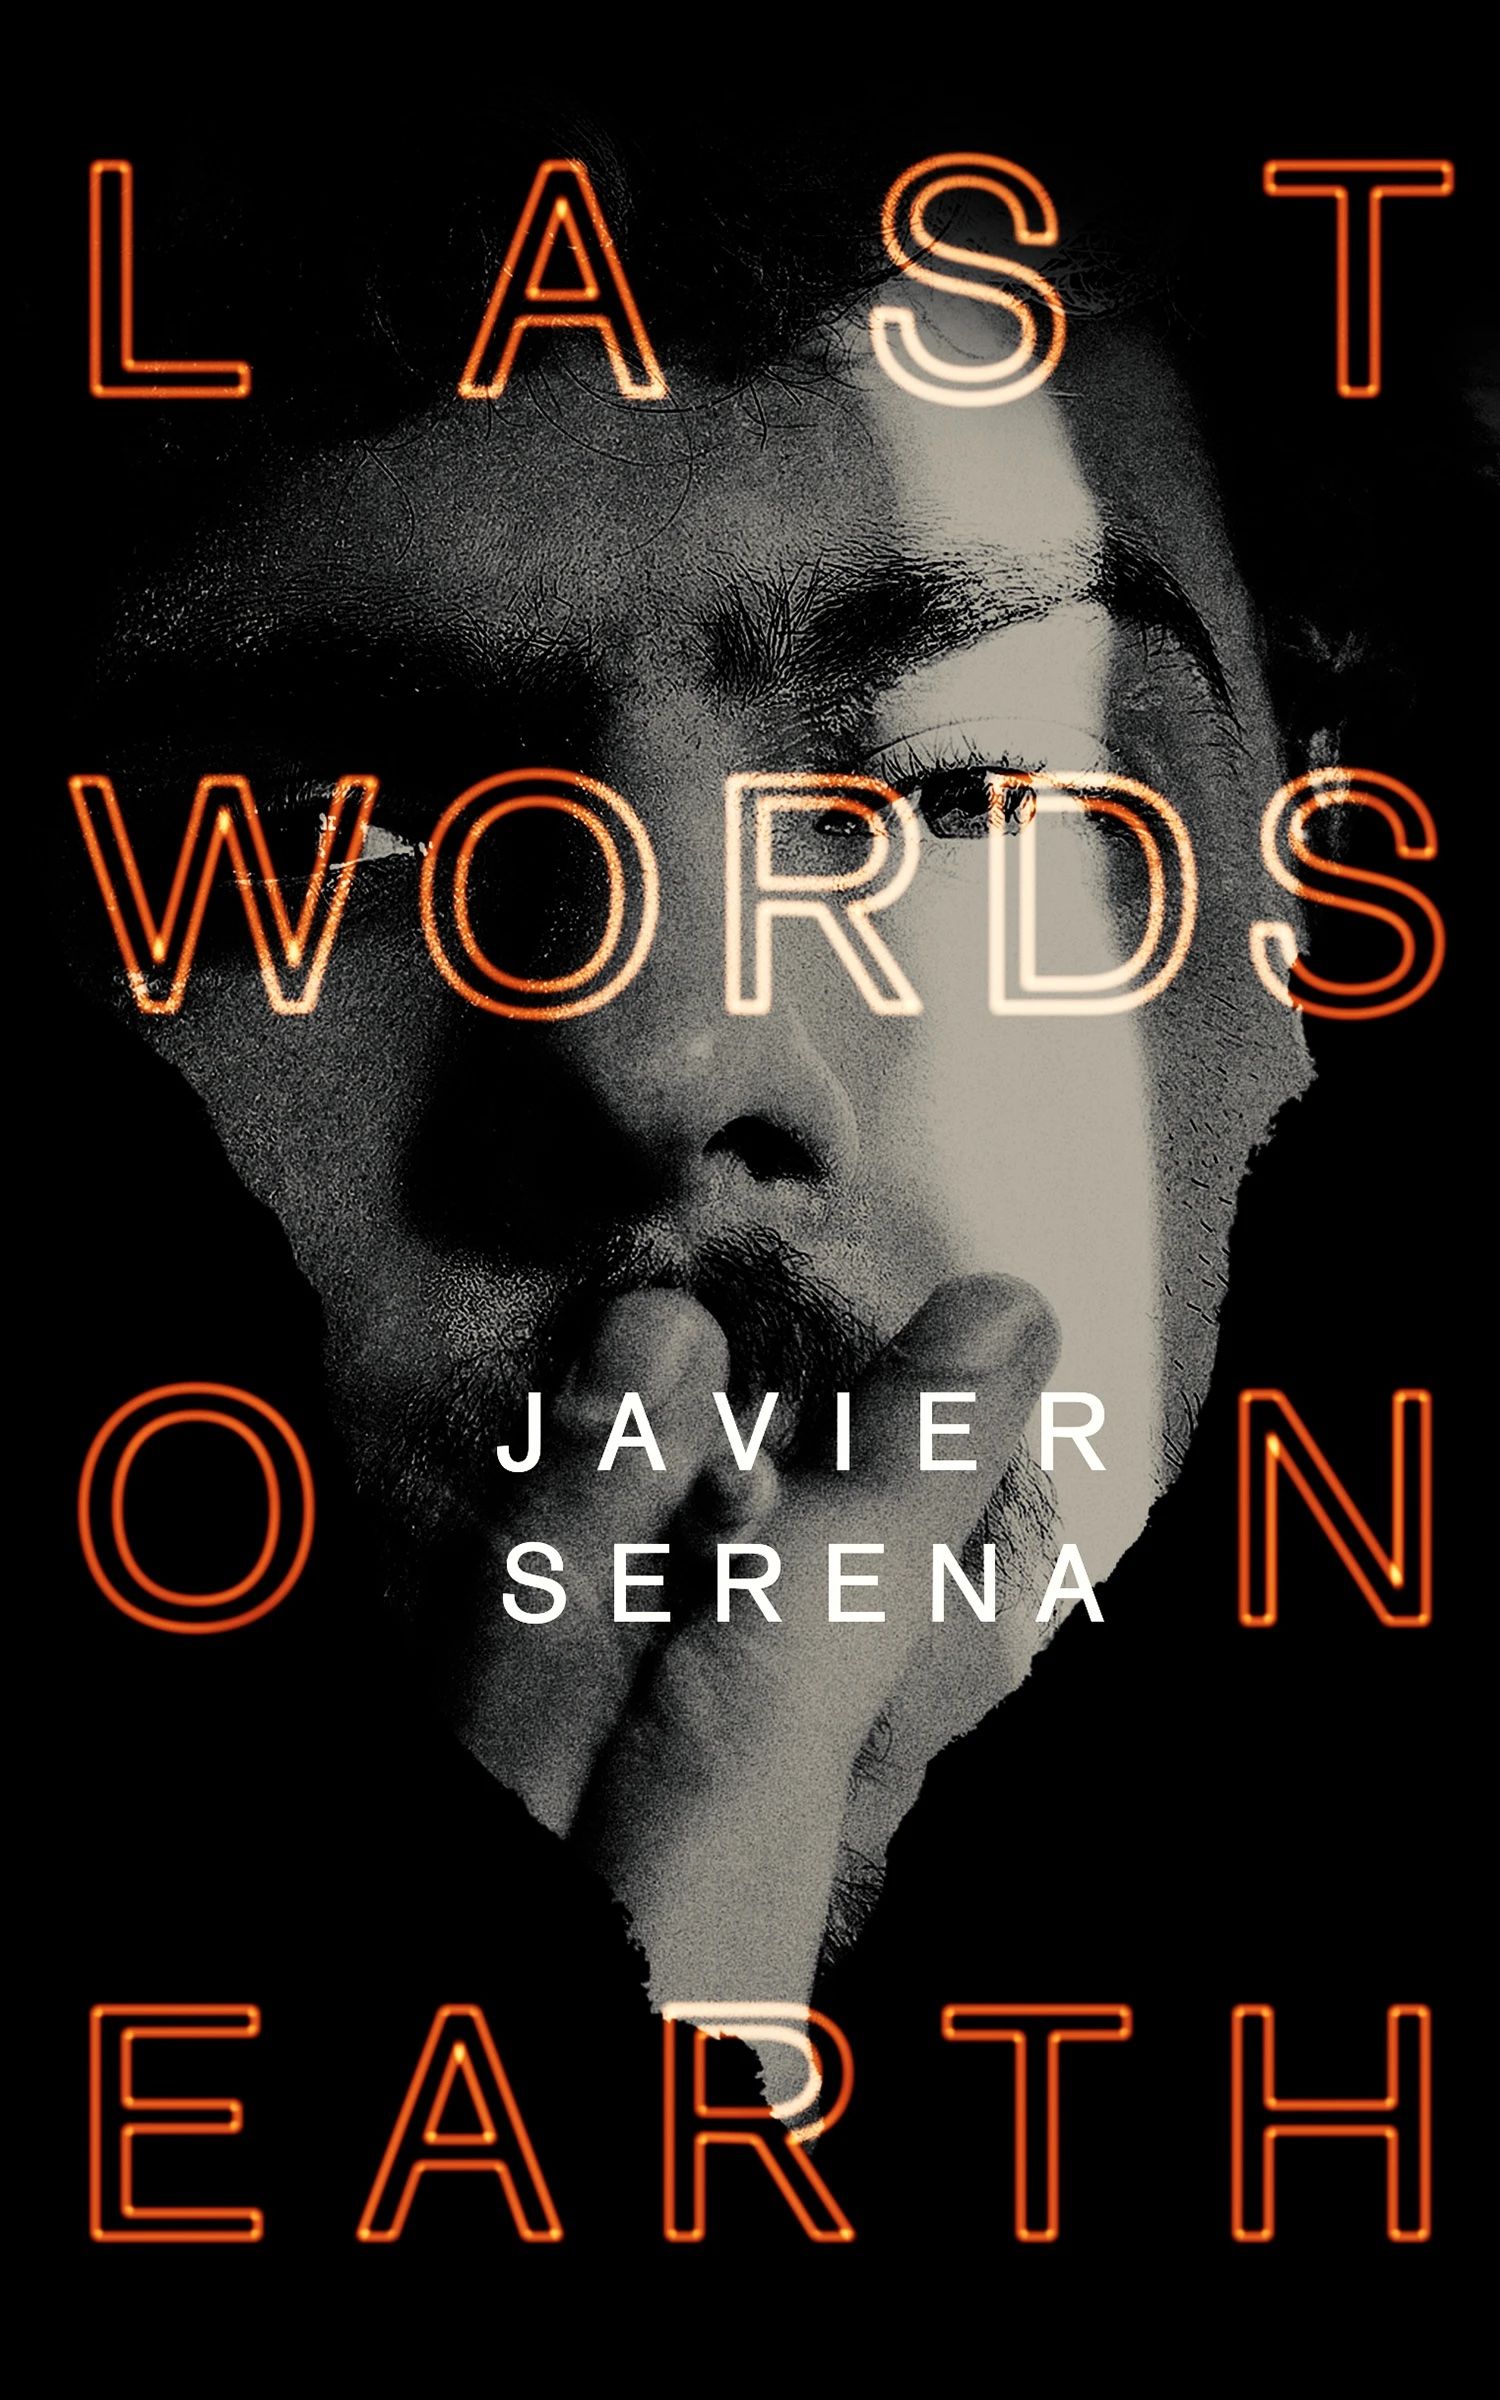 Last Words on Earth by Javier Serena, translated by Katie Whittemore